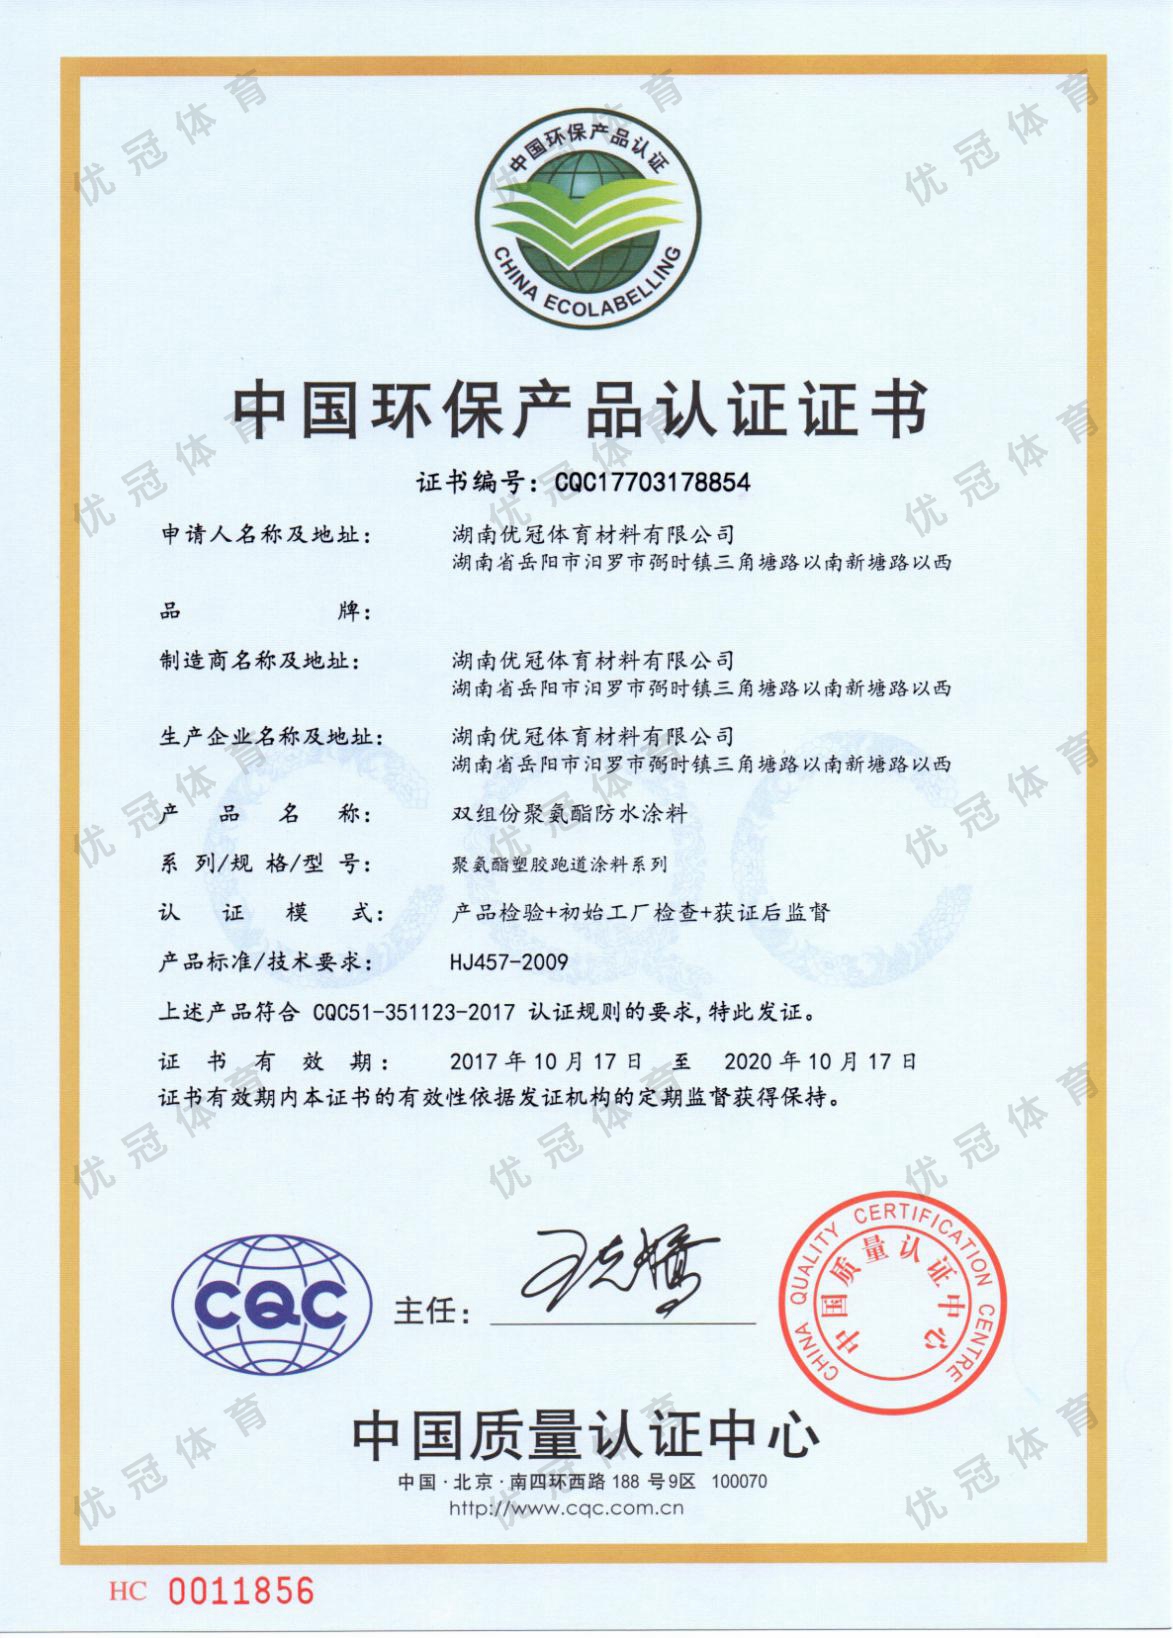 China Certification for Environmental Products (Polyurethane Coatings for Synthetic Tracks)